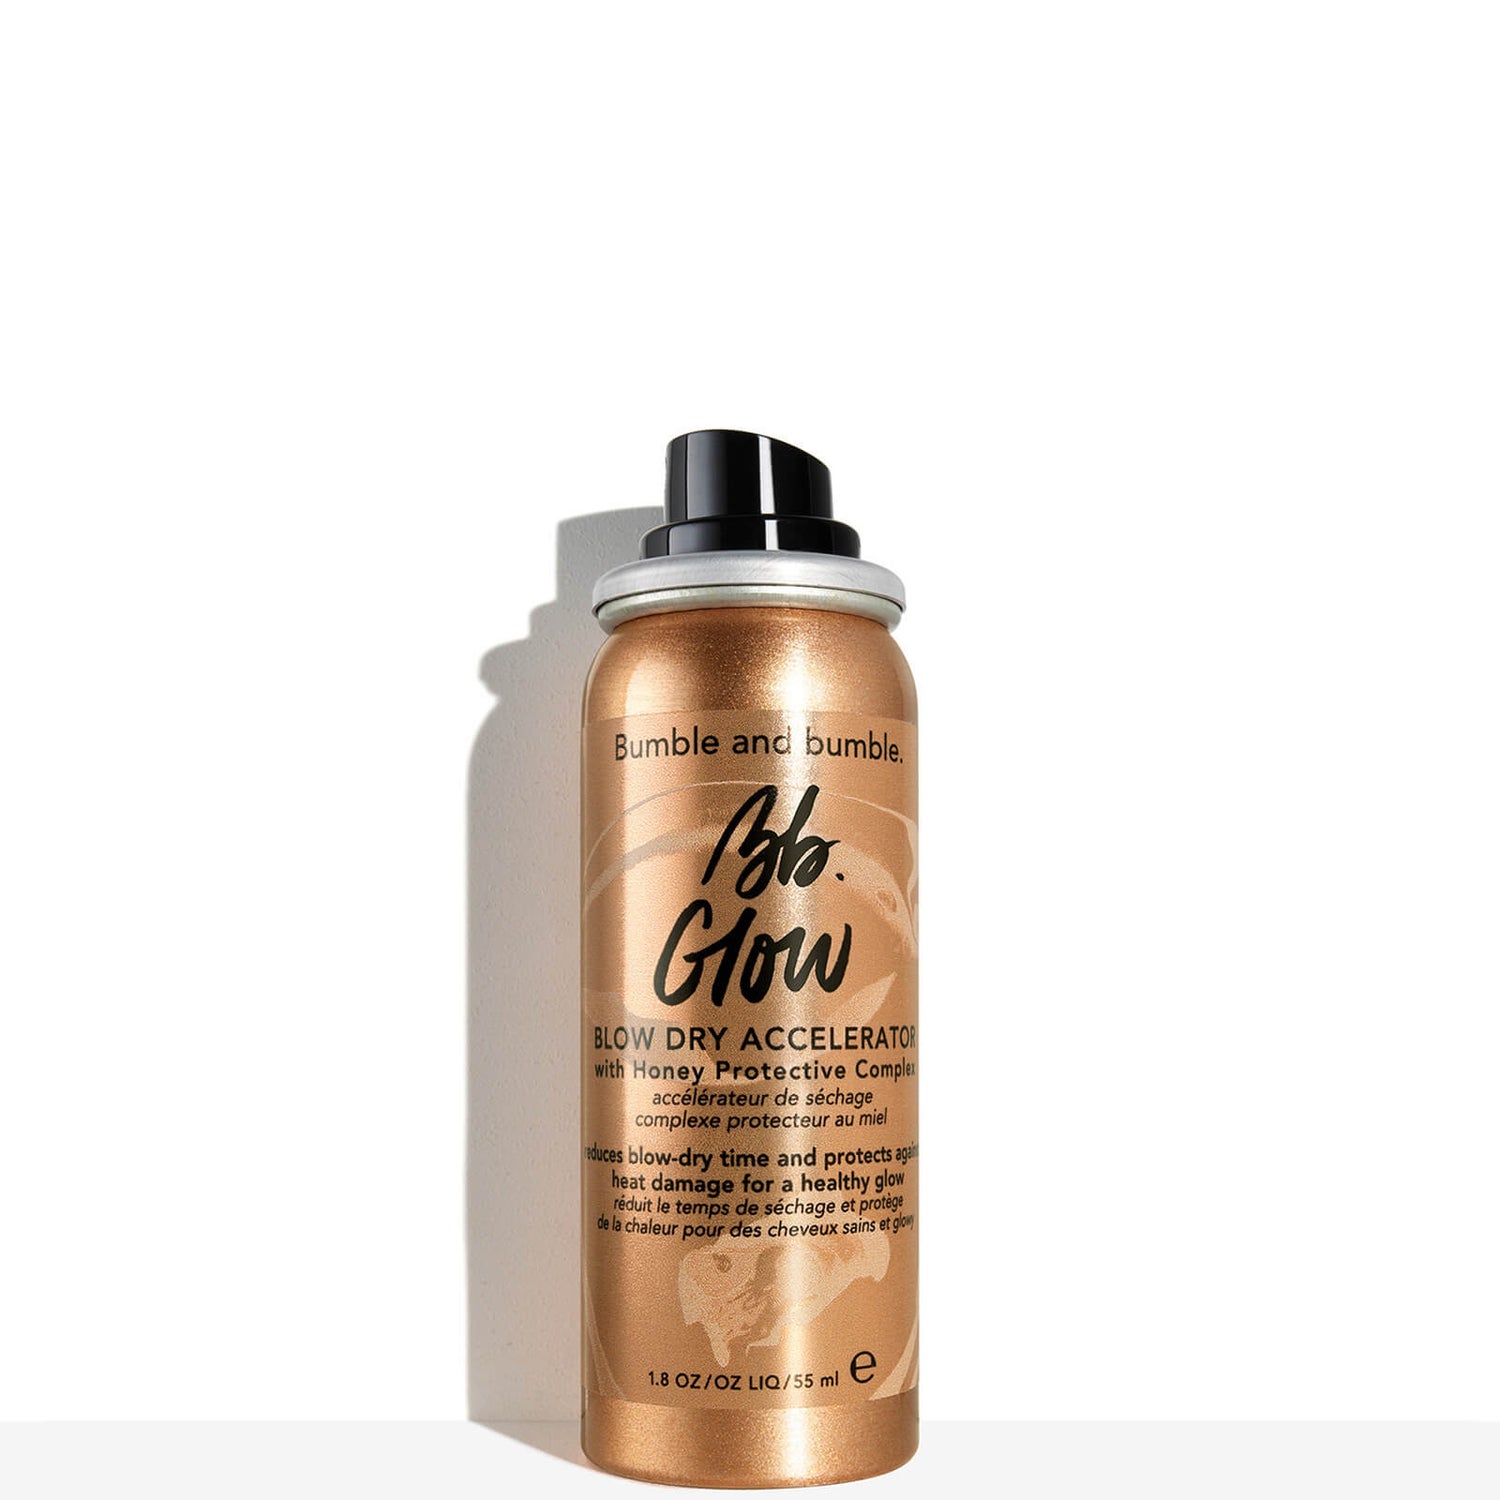 Bumble and bumble Glow Blow Dry Accelerator 150ml